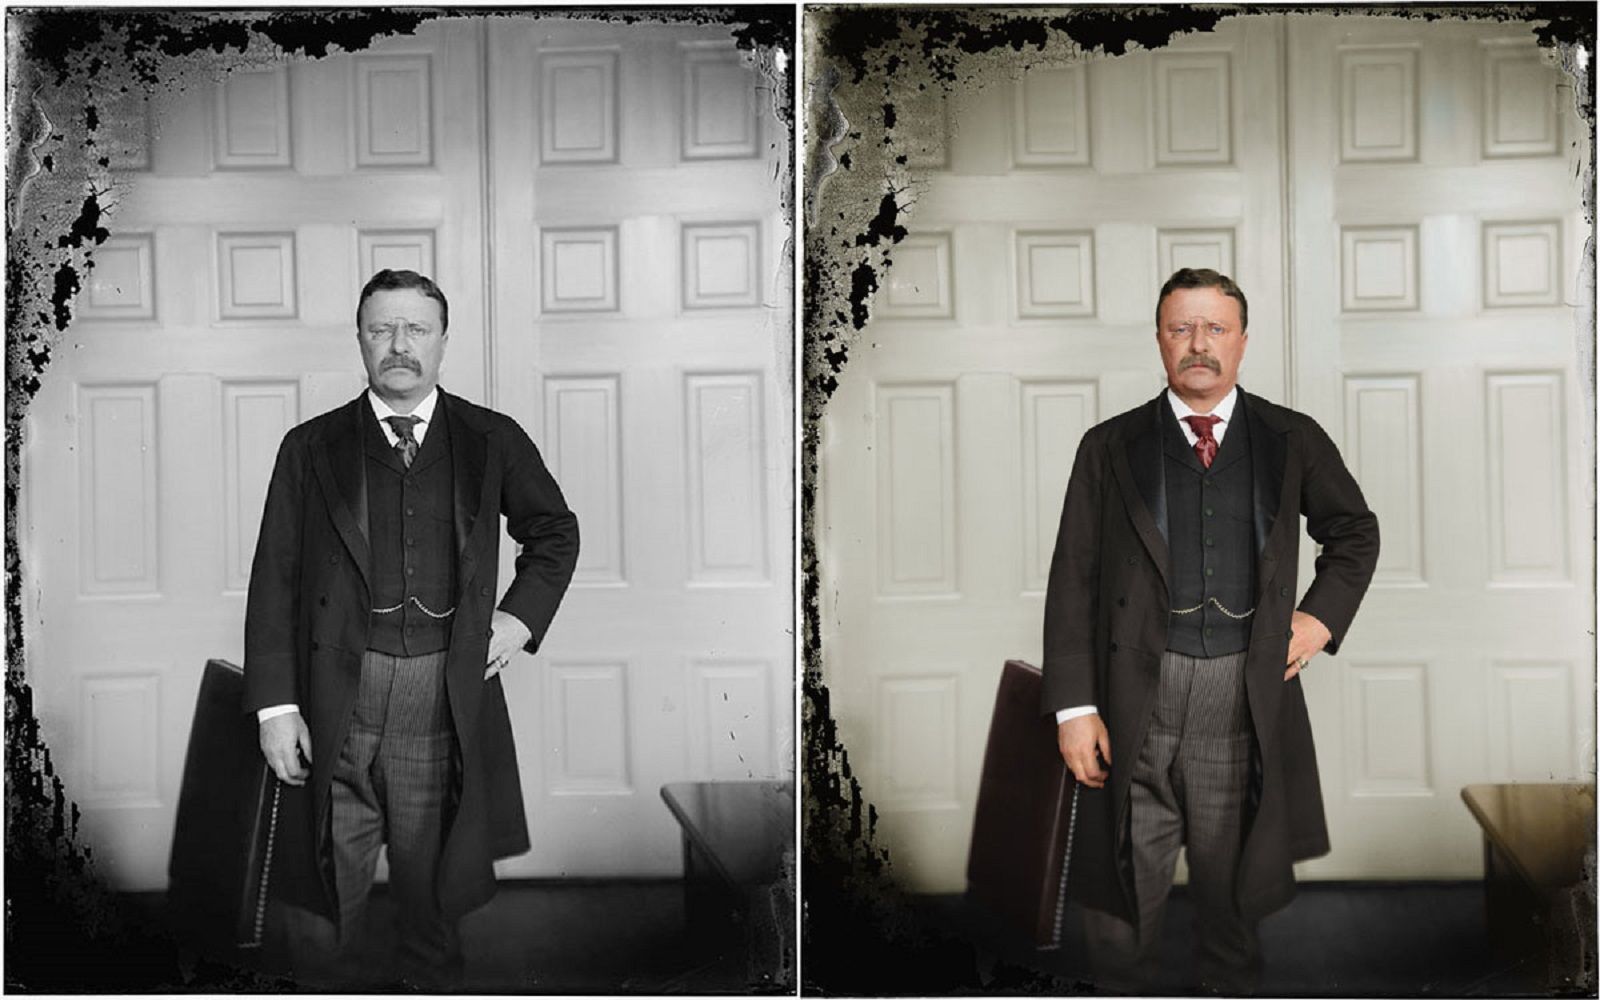 Colourised photos from history image 50